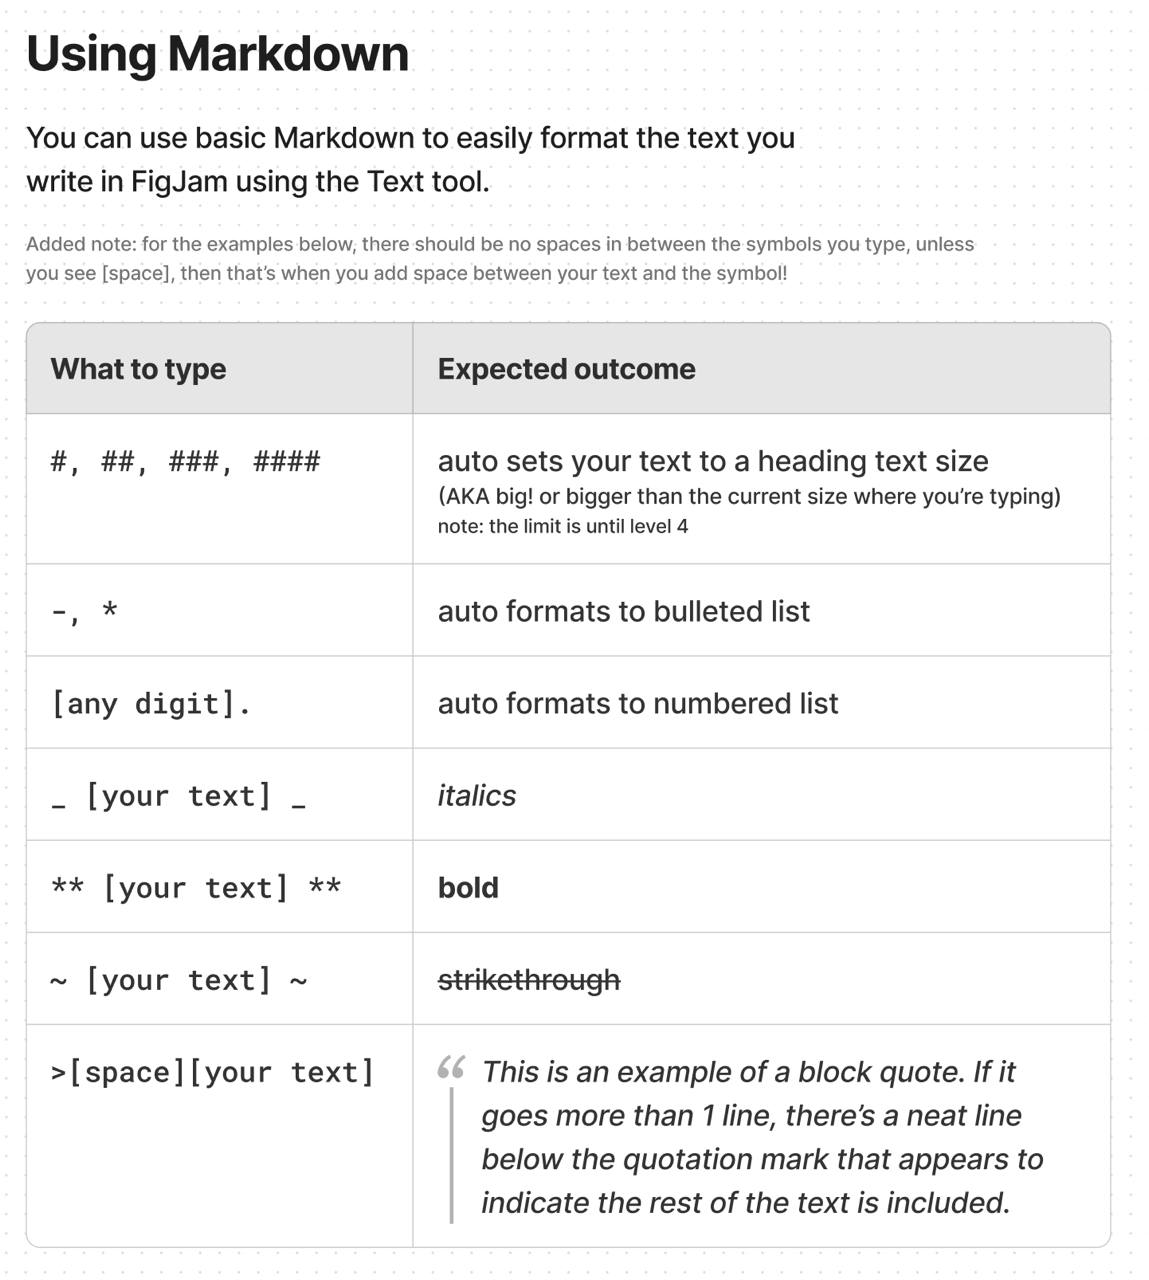 Screenshot of a written guide to using Markdown for text formatting in FigJam. The image displays a table with two columns: 'What to type' and 'Expected outcome.' It instructs users on how to create headings with '#,' bulleted lists with '-' or '*', numbered lists with '[any digit].', italicize with '-', bold with '**', strikethrough with '~', and block quotes with '>[space]'. The bottom of the image shows an example of a block quote formatting, indicating that a longer quote will be followed by a line beneath the initial quotation mark.